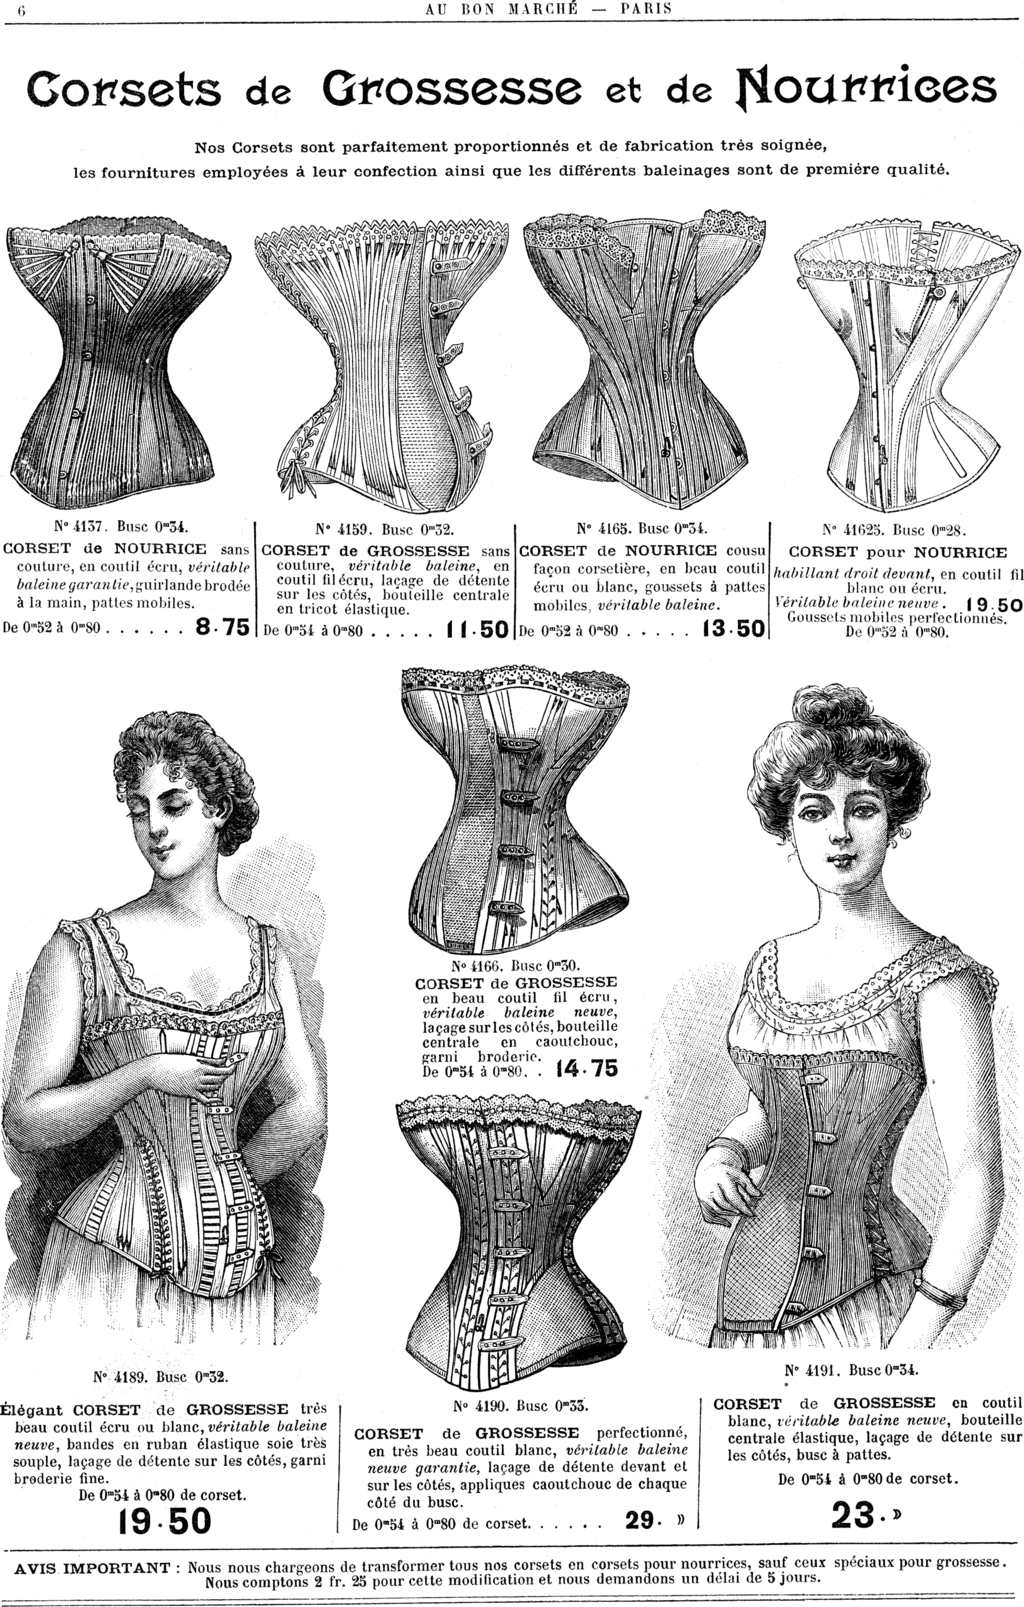 Black and white advertisement for corsets